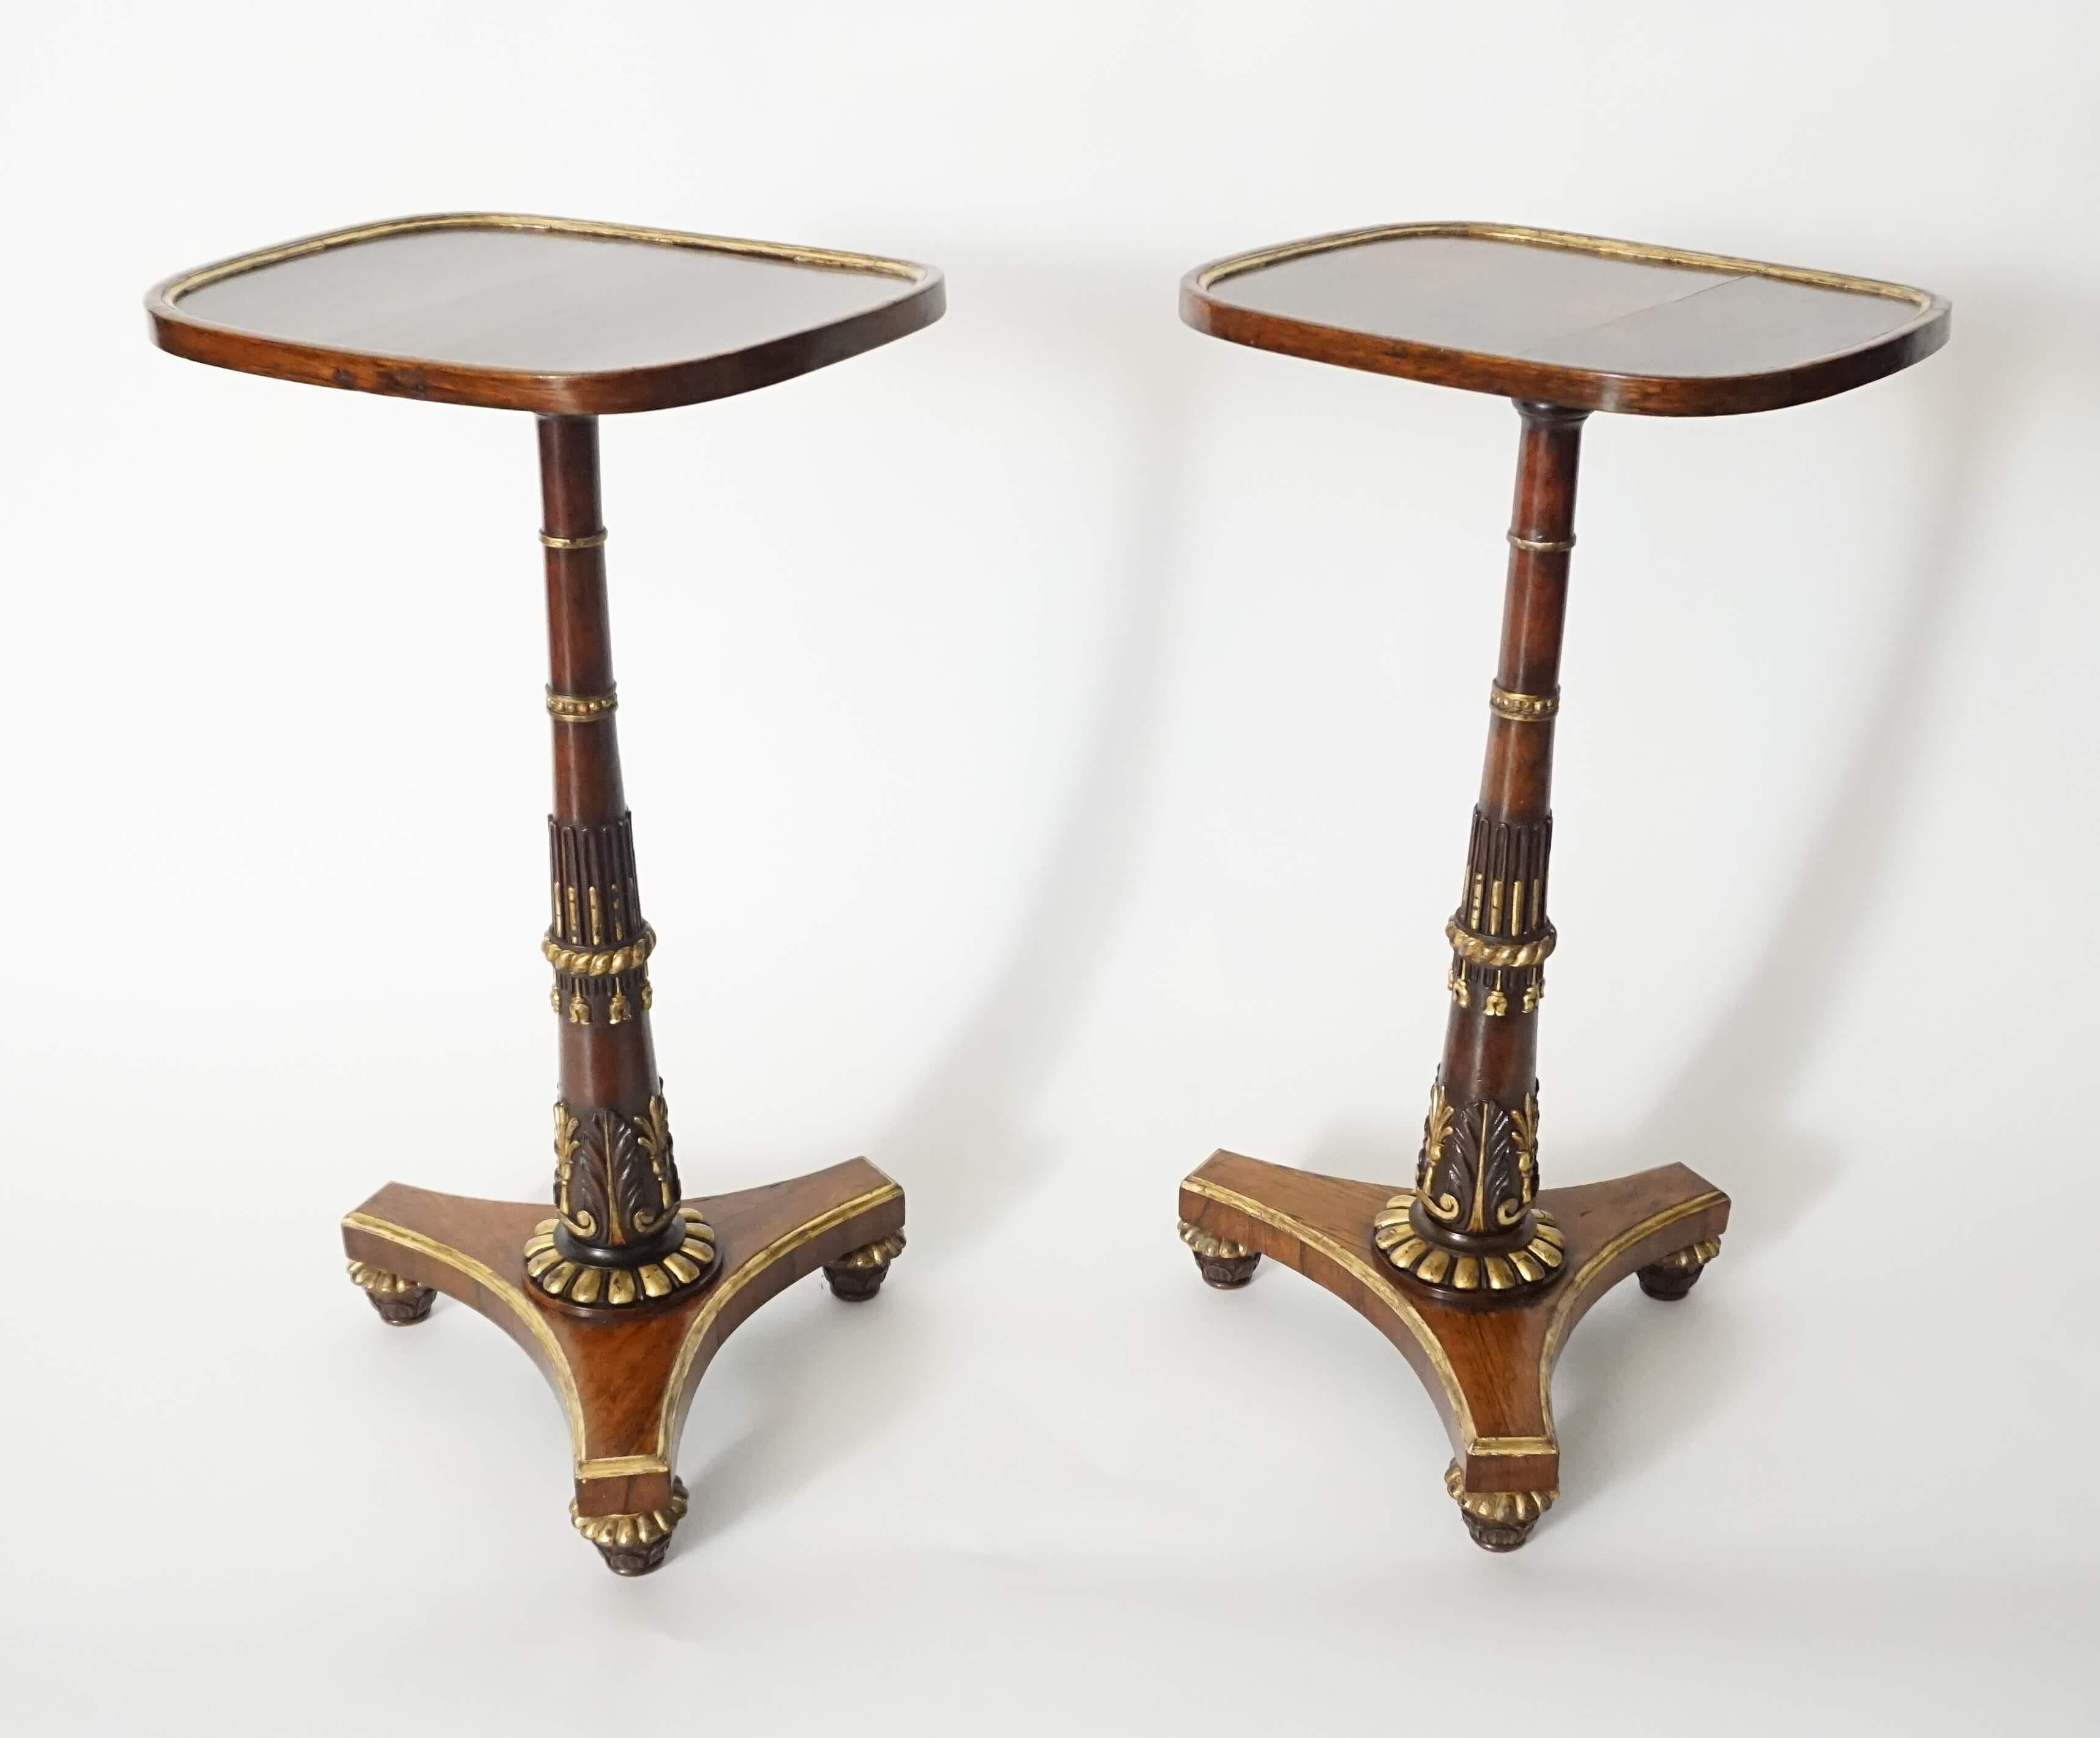 An exquisite and extremely rare pair of English Regency, circa 1828, parcel-gilt and carved rosewood side tables firmly attributed to renowned London firm Morel & Seddon, the rounded rectangular tops with gilt inner-band on carved and gilt pedestals